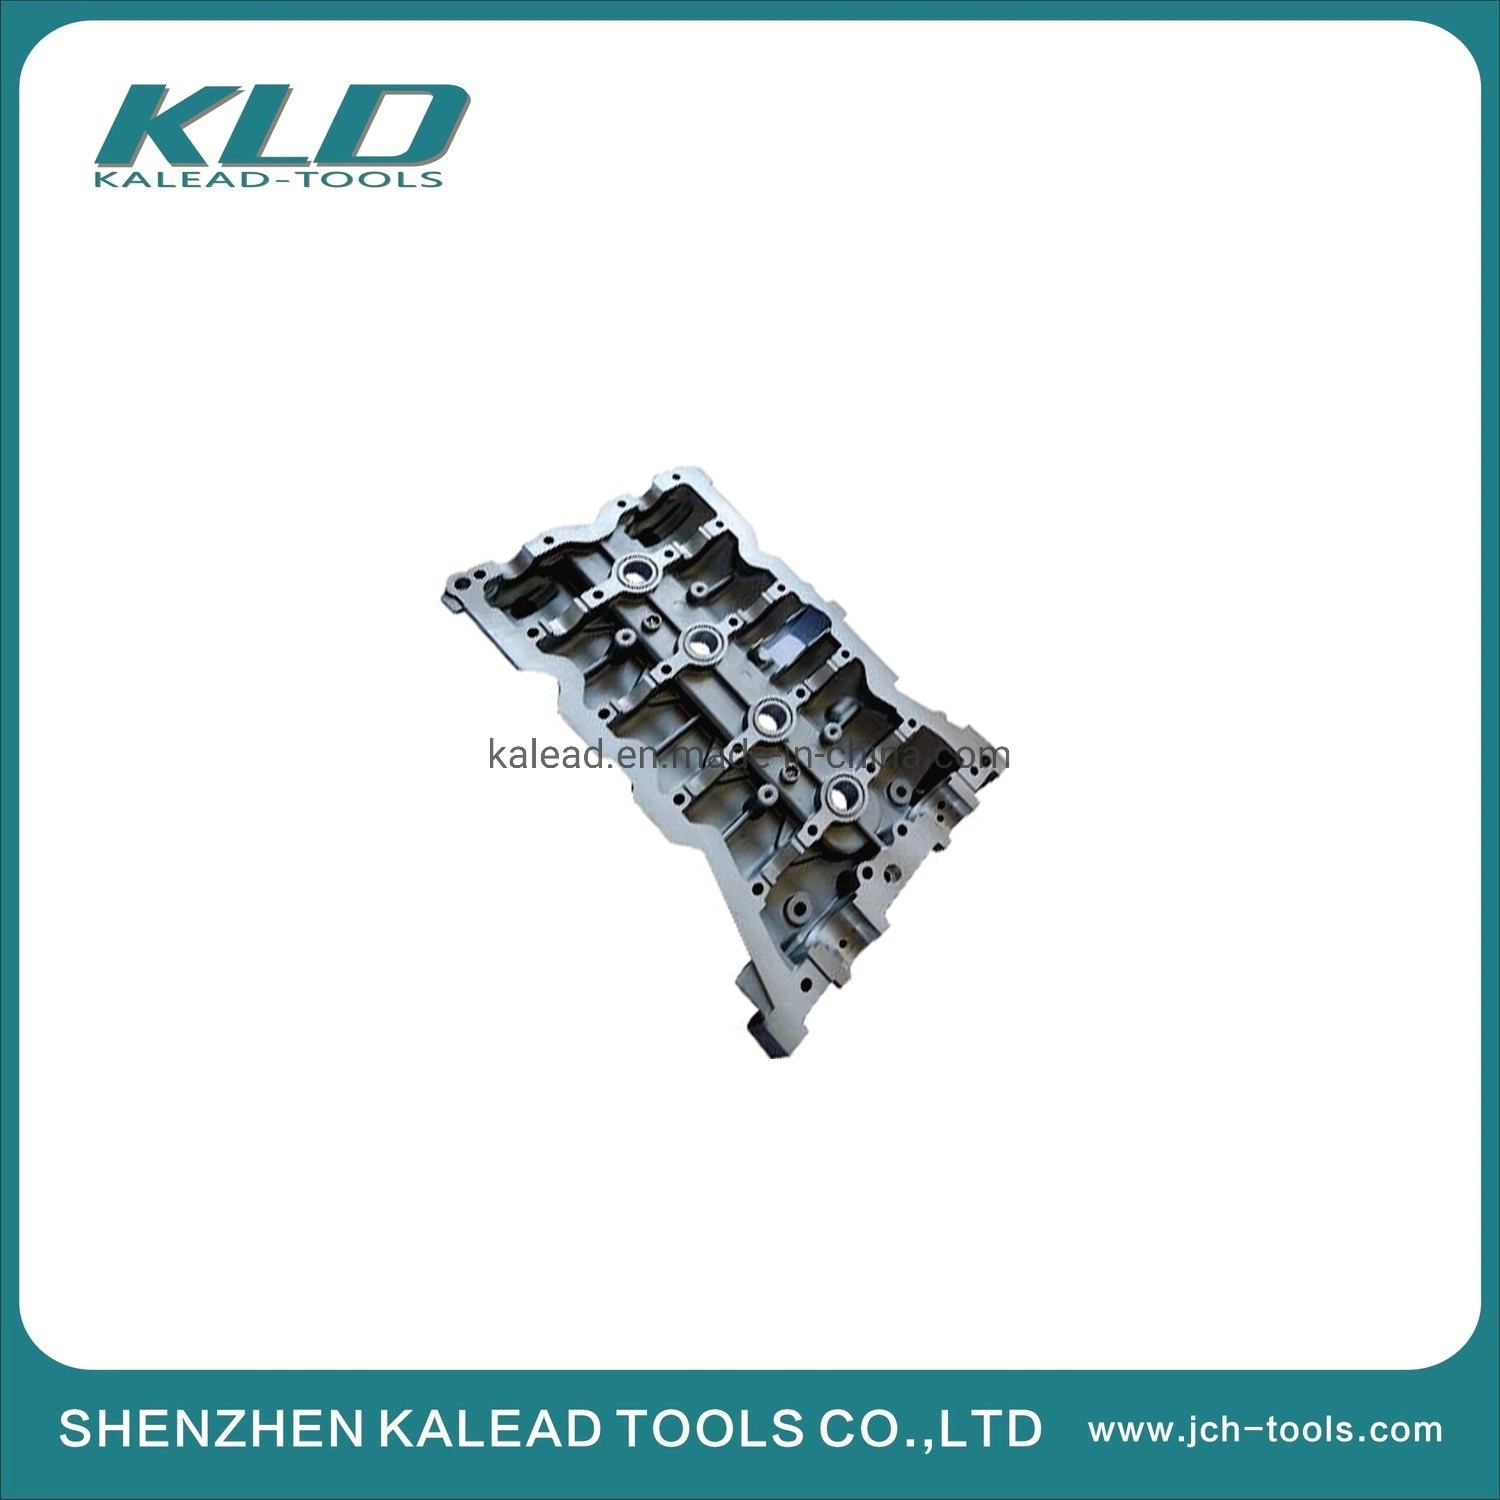 Customized Stainless Steel Precision Die Mould Blank Casting in Lost Wax Investment Ductile Iron Aluminum Zinc Alloy Casting for Mechining Parts Auto Casting